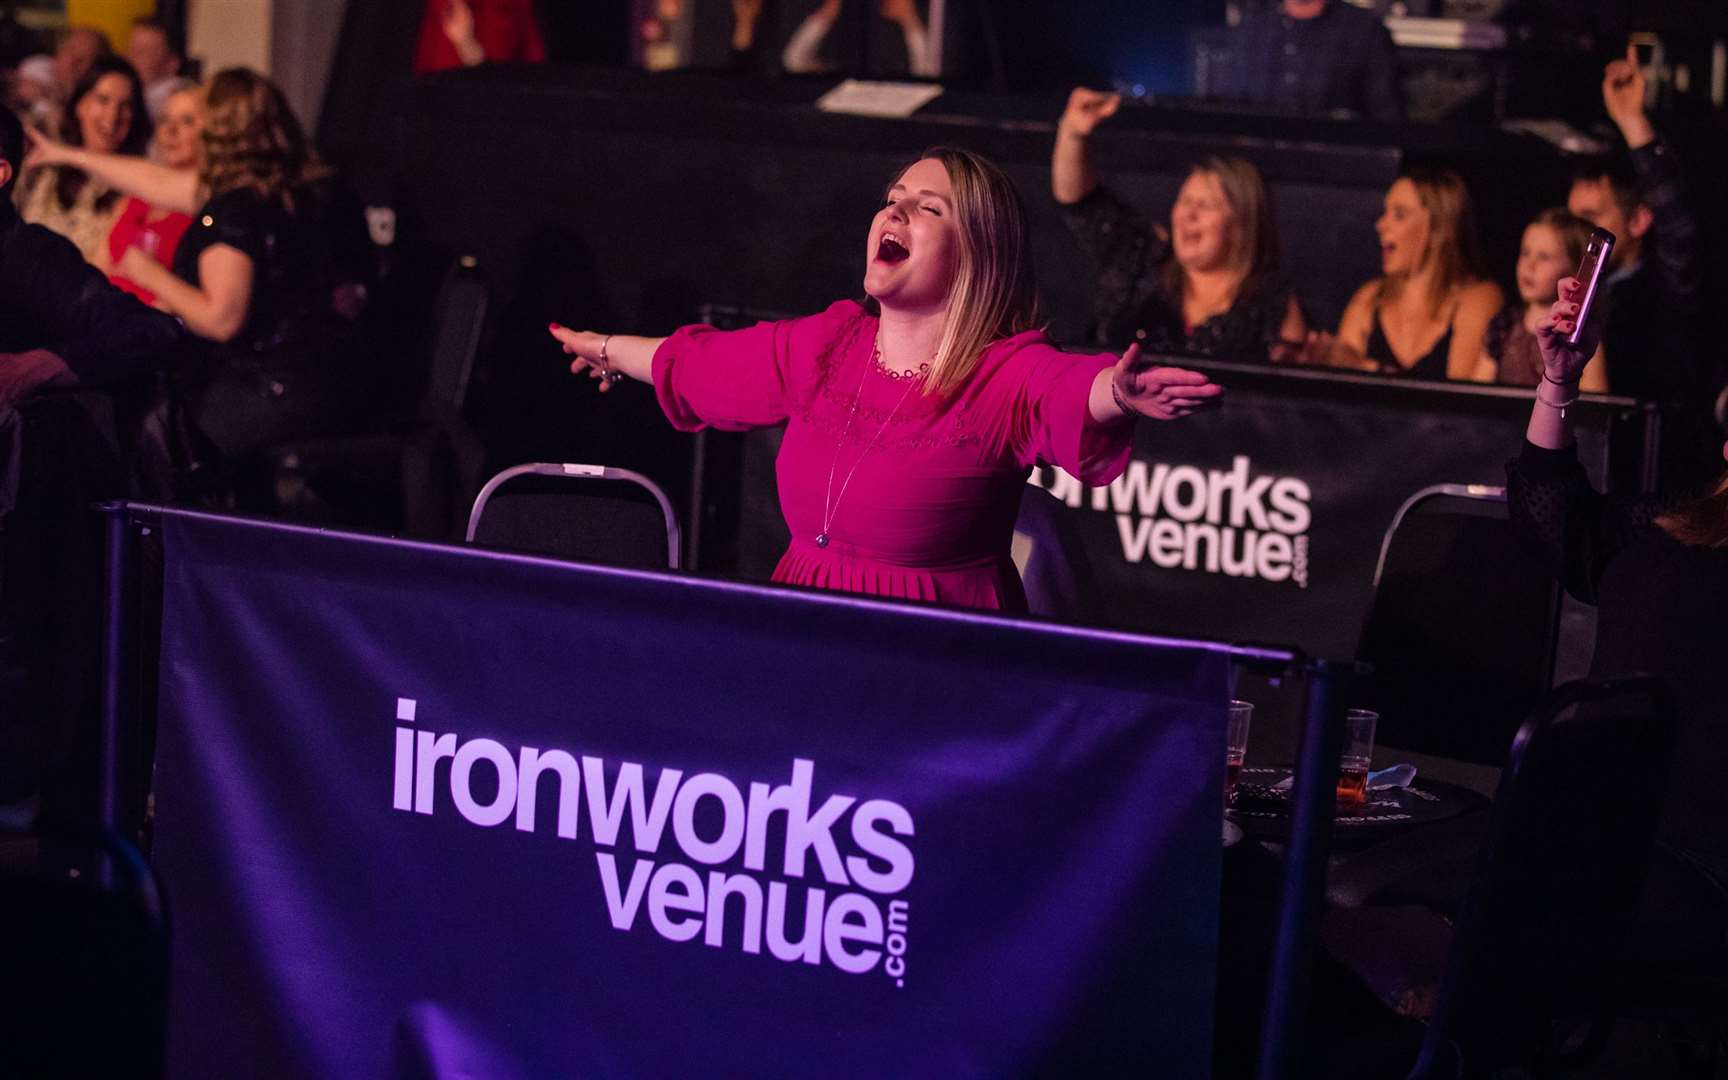 Music lovers were delighted to see be back at a live performance at the Ironworks – even if it was on a small scale.